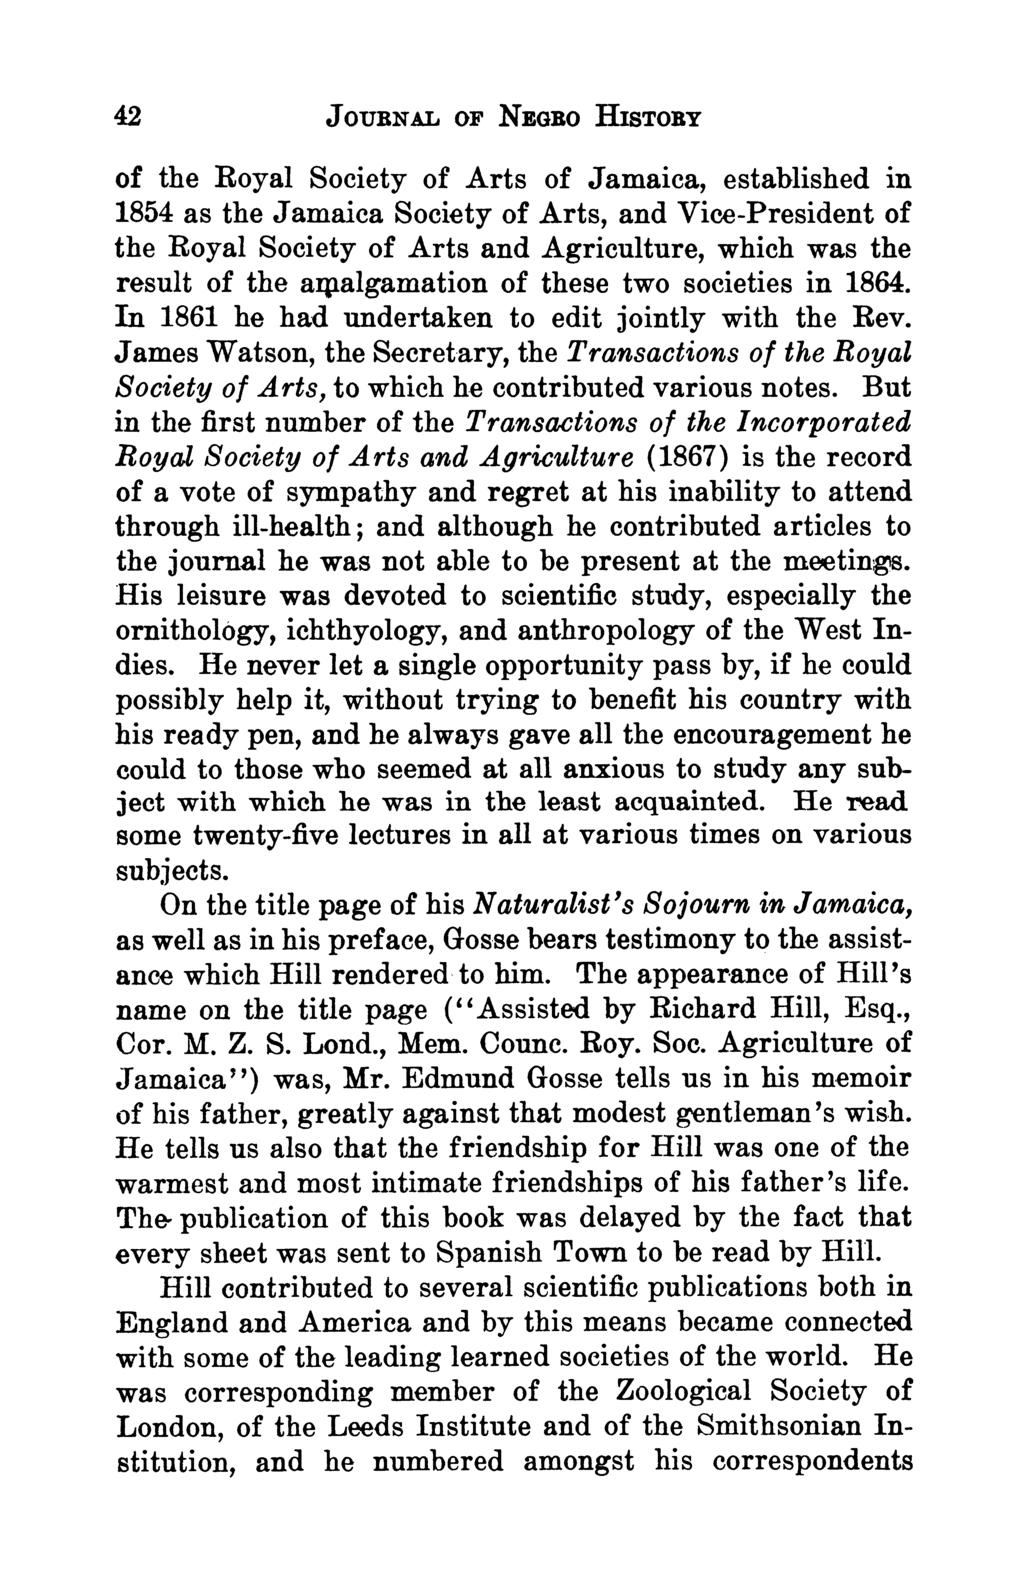 42 JOURNAL OF NEGRO HISTORY of the Royal Society of Arts of Jamaica, established in 1854 as the Jamaica Society of Arts, and Vice-President of the Royal Society of Arts and Agriculture, which was the